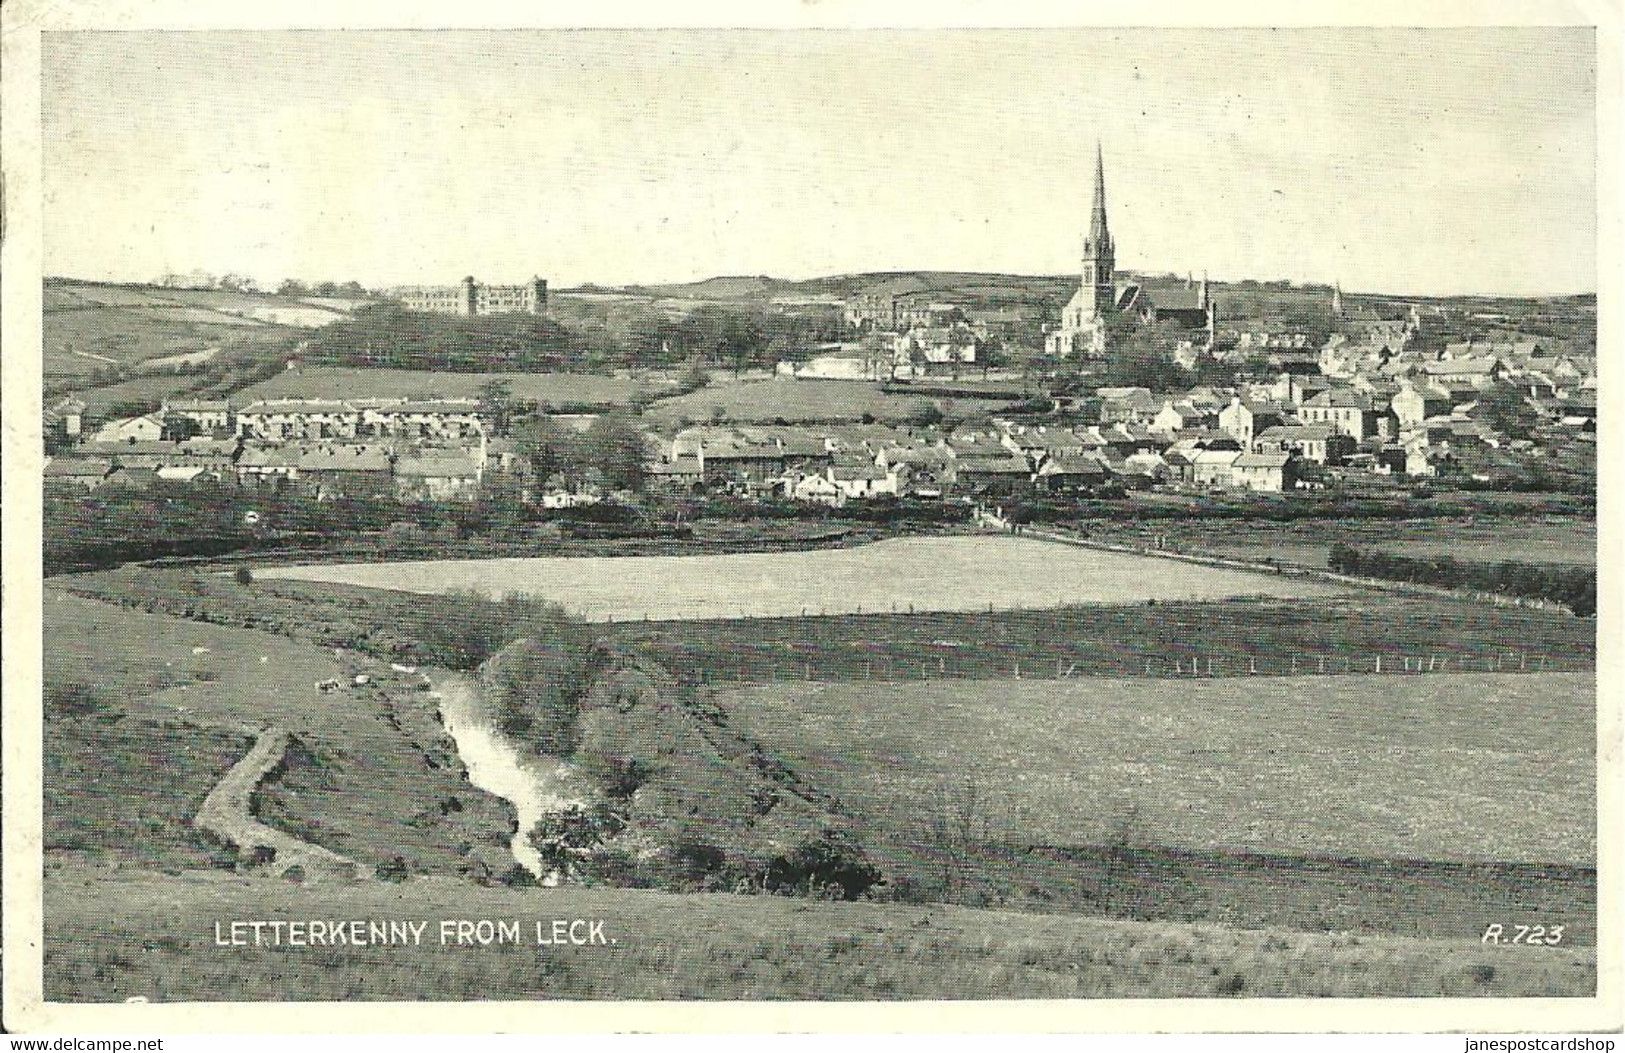 PRINTED POSTCARD - LETTERKENNY FROM LECK - POSTALLY USED 1947 - PUBLISHED BY VALENTINES - Donegal